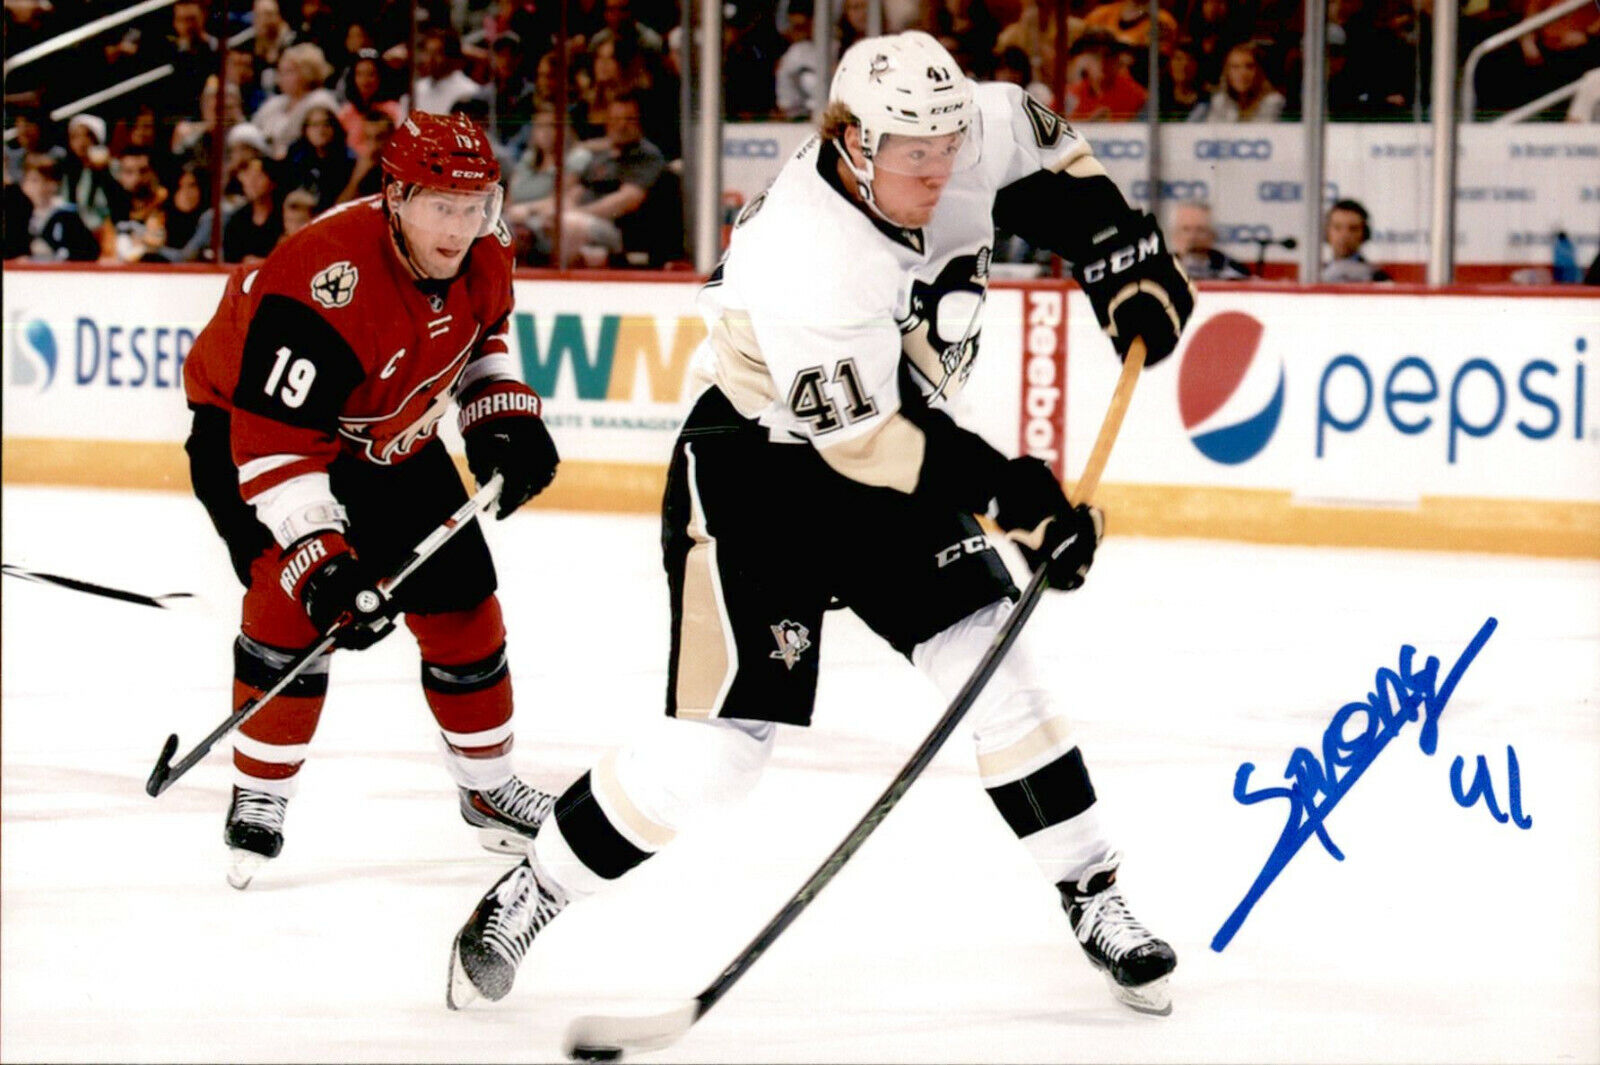 Daniel Sprong SIGNED 4x6 Photo Poster painting PITTSBURGH PENGUINS #7